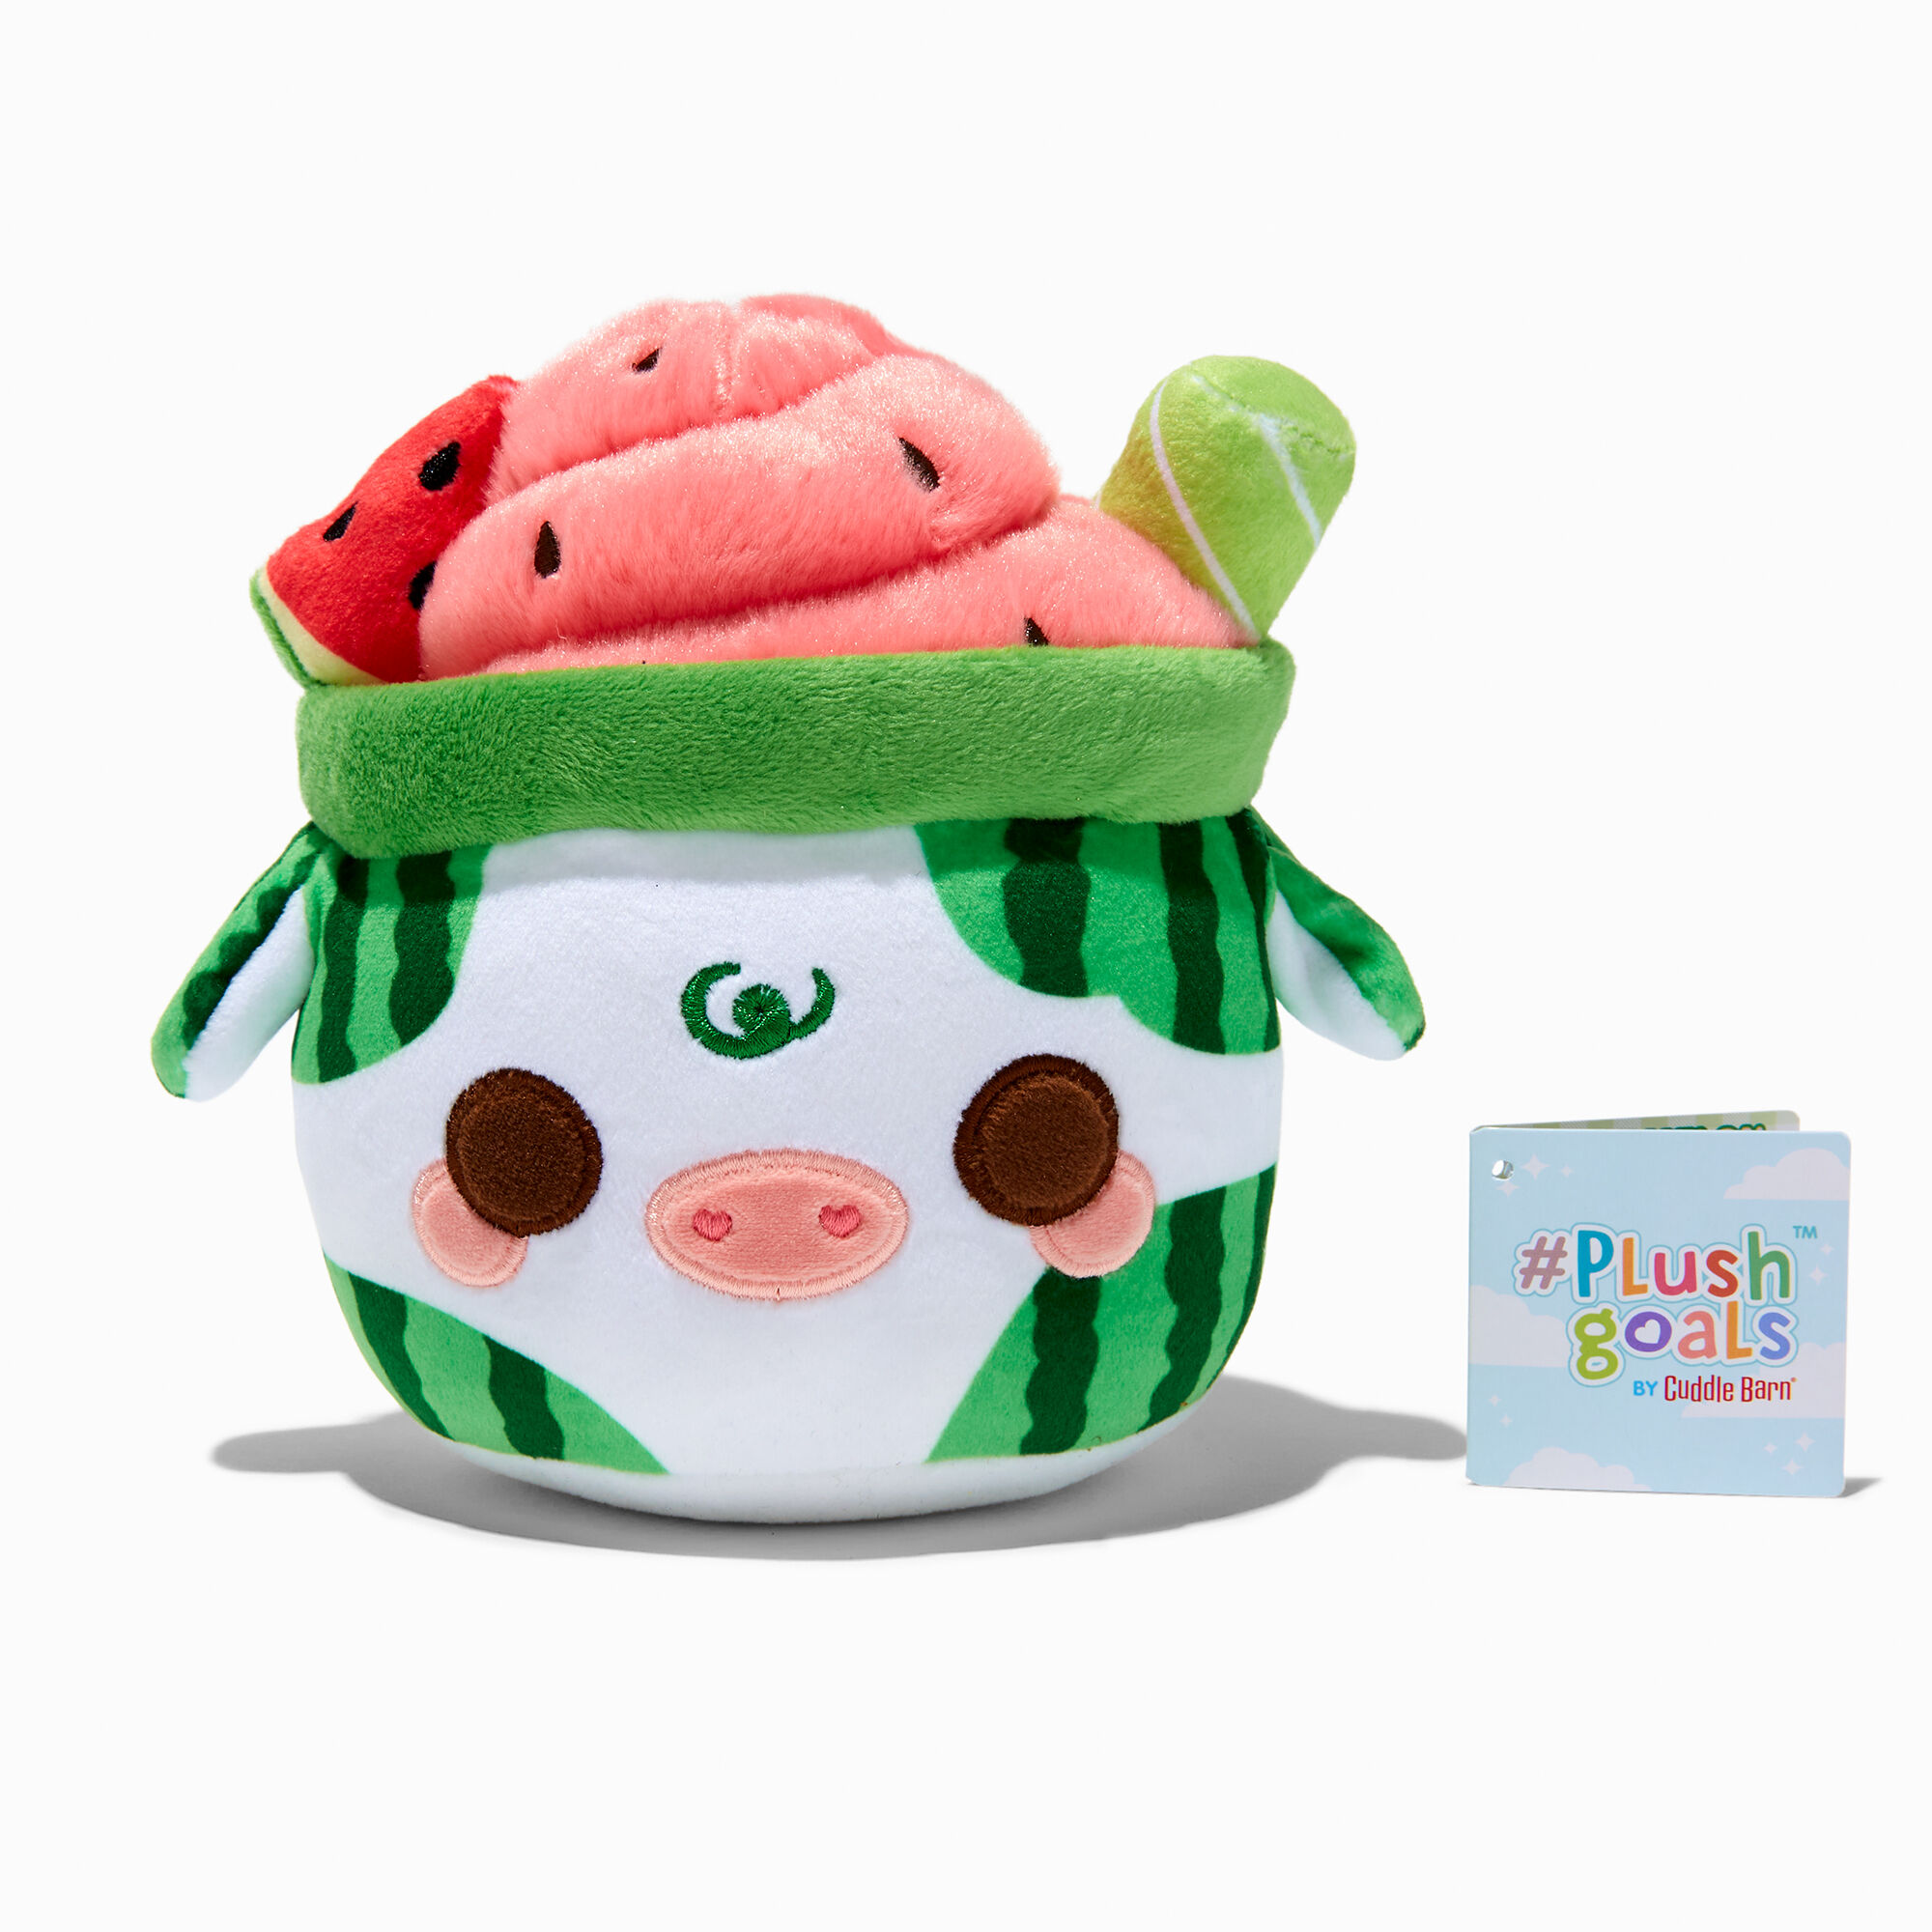 View Claires plush Goals By Cuddle Barn 7 Watermelon Mooshake Soft Toy information